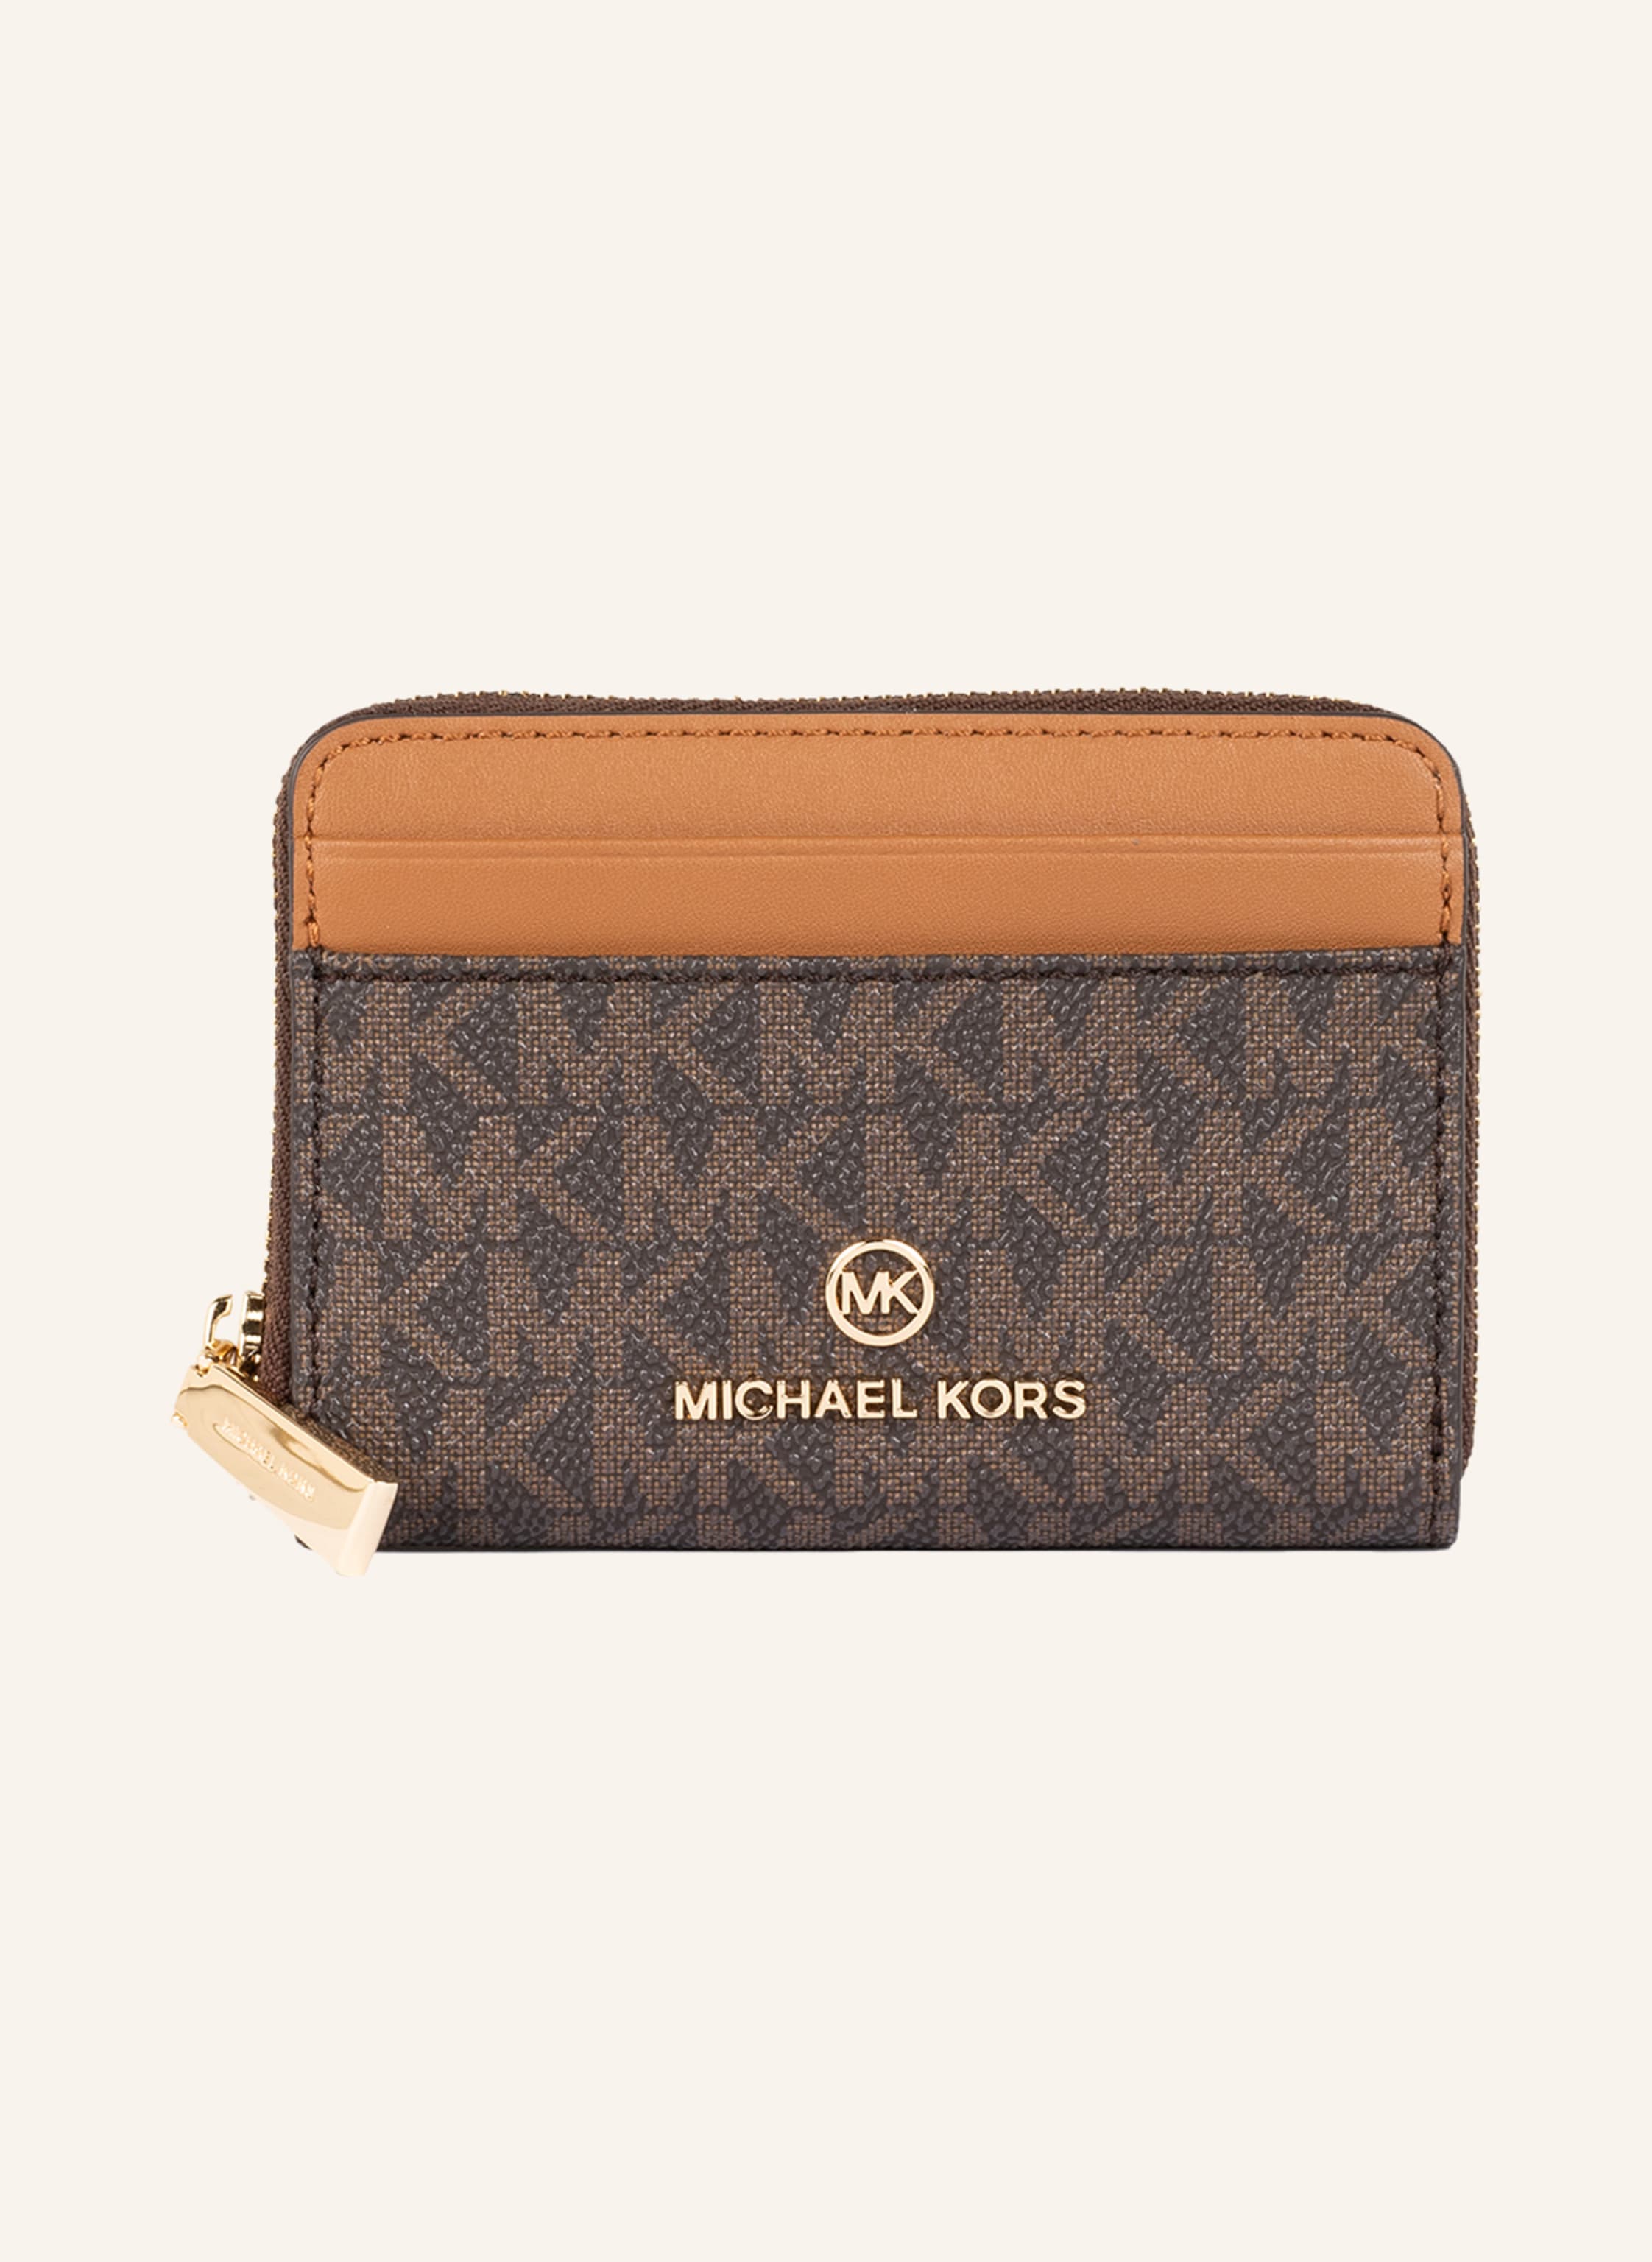 Michael Kors Jet Set Travel Small Leather Top Zip Coin Pouch Honeycomb  Yellow - Walmart.com